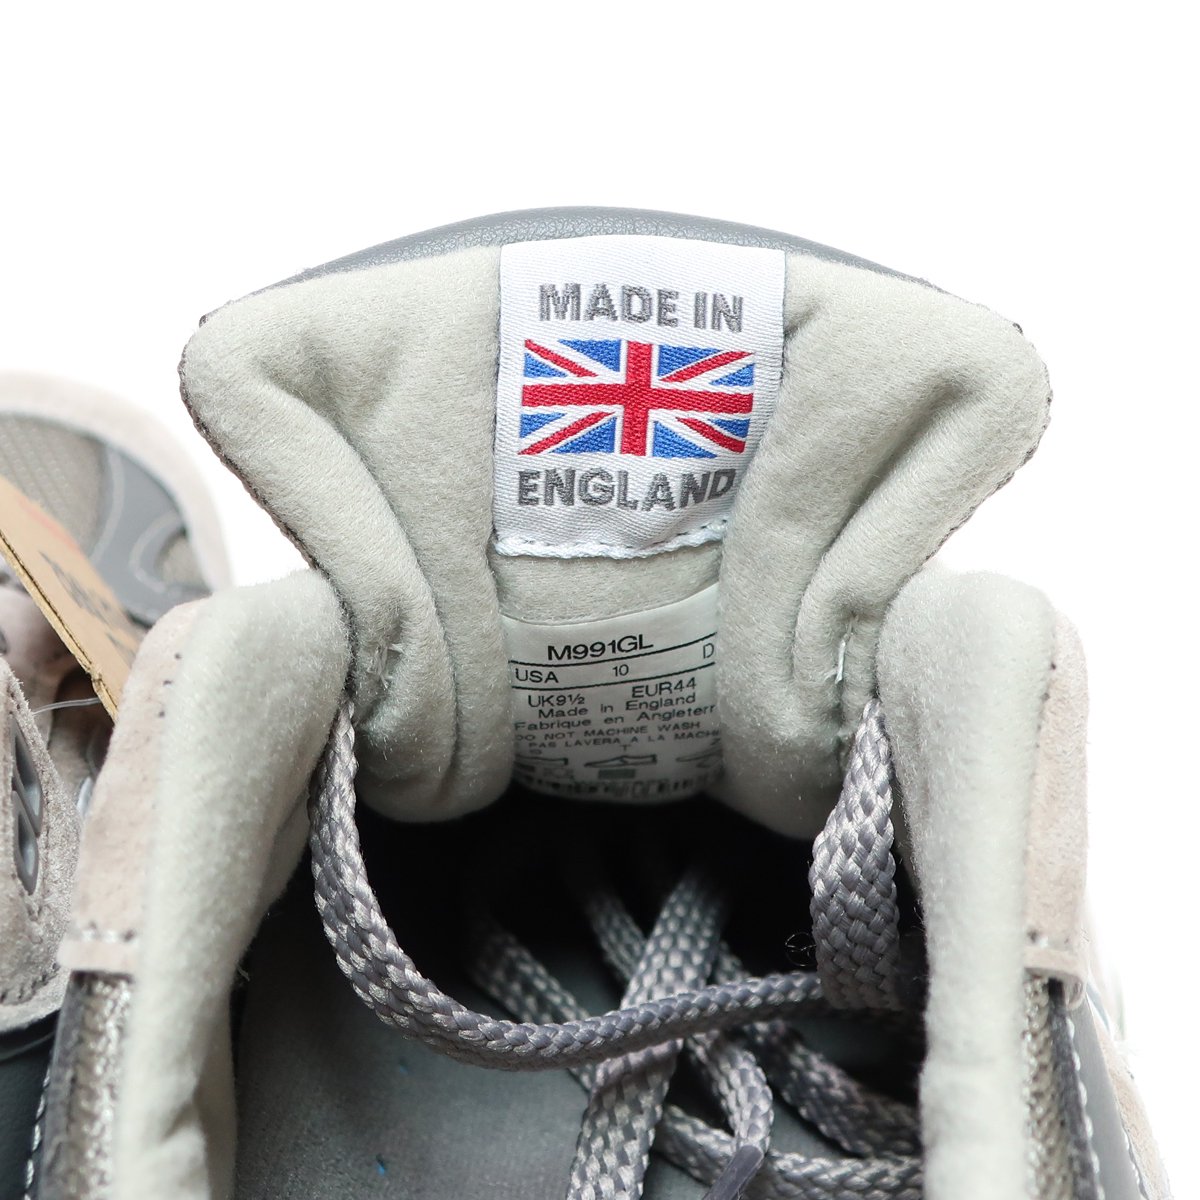 NEW BALANCE M991GL GRAY GREY SUEDE MADE IN ENGLAND ...